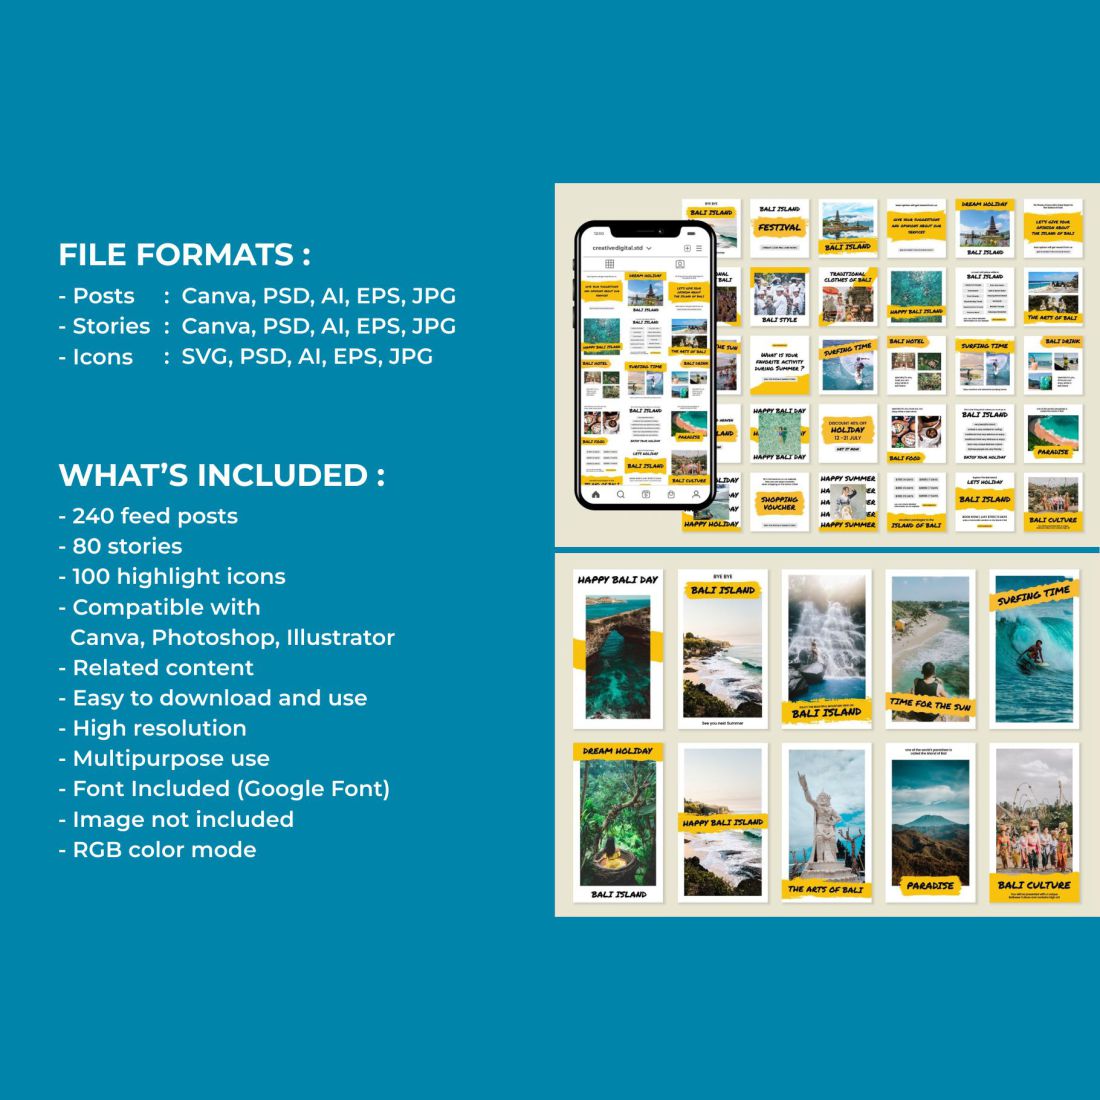 400 Plus Instagram Template Bundle For Holiday Tour And Travel Cover Image.